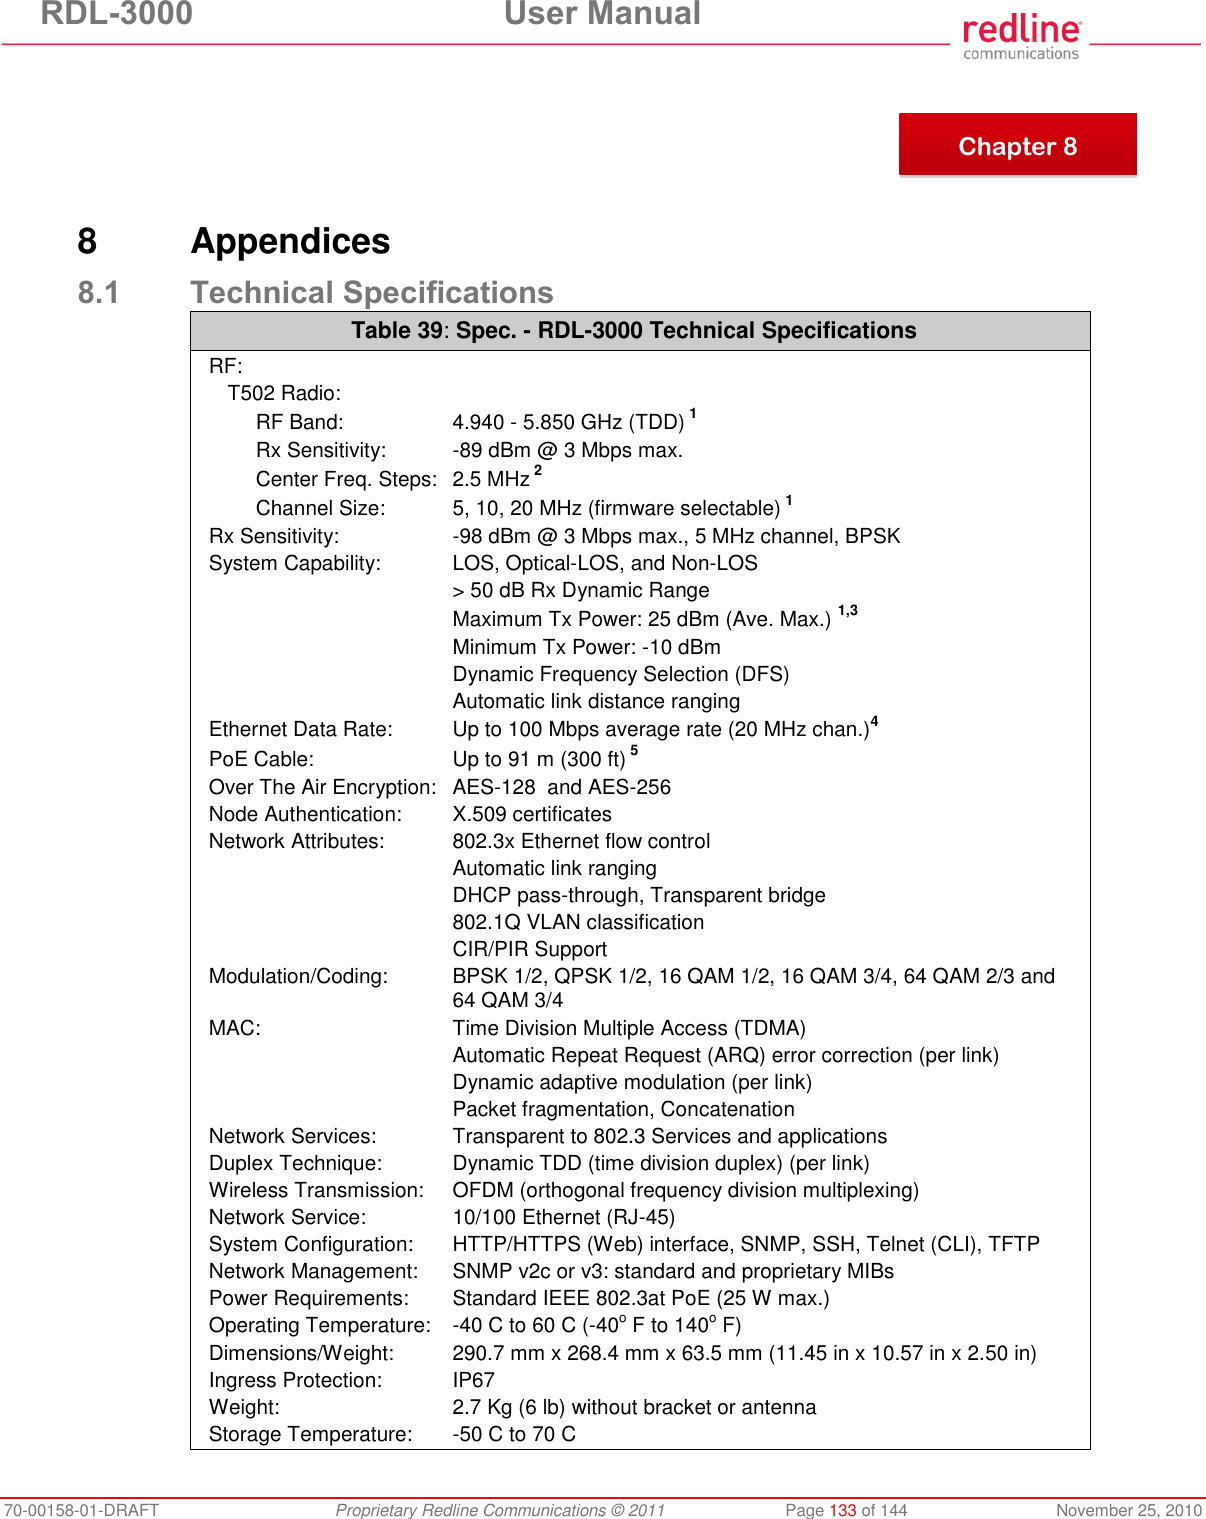 RDL-3000  User Manual 70-00158-01-DRAFT  Proprietary Redline Communications © 2011  Page 133 of 144  November 25, 2010       8  Appendices 8.1 Technical Specifications Table 39: Spec. - RDL-3000 Technical Specifications RF: T502 Radio:   RF Band:  4.940 - 5.850 GHz (TDD) 1   Rx Sensitivity:   -89 dBm @ 3 Mbps max.   Center Freq. Steps:  2.5 MHz 2   Channel Size:  5, 10, 20 MHz (firmware selectable) 1 Rx Sensitivity:  -98 dBm @ 3 Mbps max., 5 MHz channel, BPSK System Capability:  LOS, Optical-LOS, and Non-LOS   &gt; 50 dB Rx Dynamic Range   Maximum Tx Power: 25 dBm (Ave. Max.) 1,3   Minimum Tx Power: -10 dBm   Dynamic Frequency Selection (DFS)   Automatic link distance ranging Ethernet Data Rate:  Up to 100 Mbps average rate (20 MHz chan.)4 PoE Cable:  Up to 91 m (300 ft) 5 Over The Air Encryption:  AES-128  and AES-256 Node Authentication:  X.509 certificates Network Attributes:  802.3x Ethernet flow control   Automatic link ranging   DHCP pass-through, Transparent bridge   802.1Q VLAN classification   CIR/PIR Support Modulation/Coding:  BPSK 1/2, QPSK 1/2, 16 QAM 1/2, 16 QAM 3/4, 64 QAM 2/3 and 64 QAM 3/4 MAC:  Time Division Multiple Access (TDMA)   Automatic Repeat Request (ARQ) error correction (per link)   Dynamic adaptive modulation (per link)    Packet fragmentation, Concatenation Network Services:  Transparent to 802.3 Services and applications Duplex Technique:  Dynamic TDD (time division duplex) (per link) Wireless Transmission:  OFDM (orthogonal frequency division multiplexing) Network Service:  10/100 Ethernet (RJ-45) System Configuration:  HTTP/HTTPS (Web) interface, SNMP, SSH, Telnet (CLI), TFTP Network Management:  SNMP v2c or v3: standard and proprietary MIBs Power Requirements:  Standard IEEE 802.3at PoE (25 W max.) Operating Temperature:   -40 C to 60 C (-40o F to 140o F) Dimensions/Weight:  290.7 mm x 268.4 mm x 63.5 mm (11.45 in x 10.57 in x 2.50 in) Ingress Protection:  IP67 Weight:  2.7 Kg (6 lb) without bracket or antenna Storage Temperature:   -50 C to 70 C  Chapter 8 